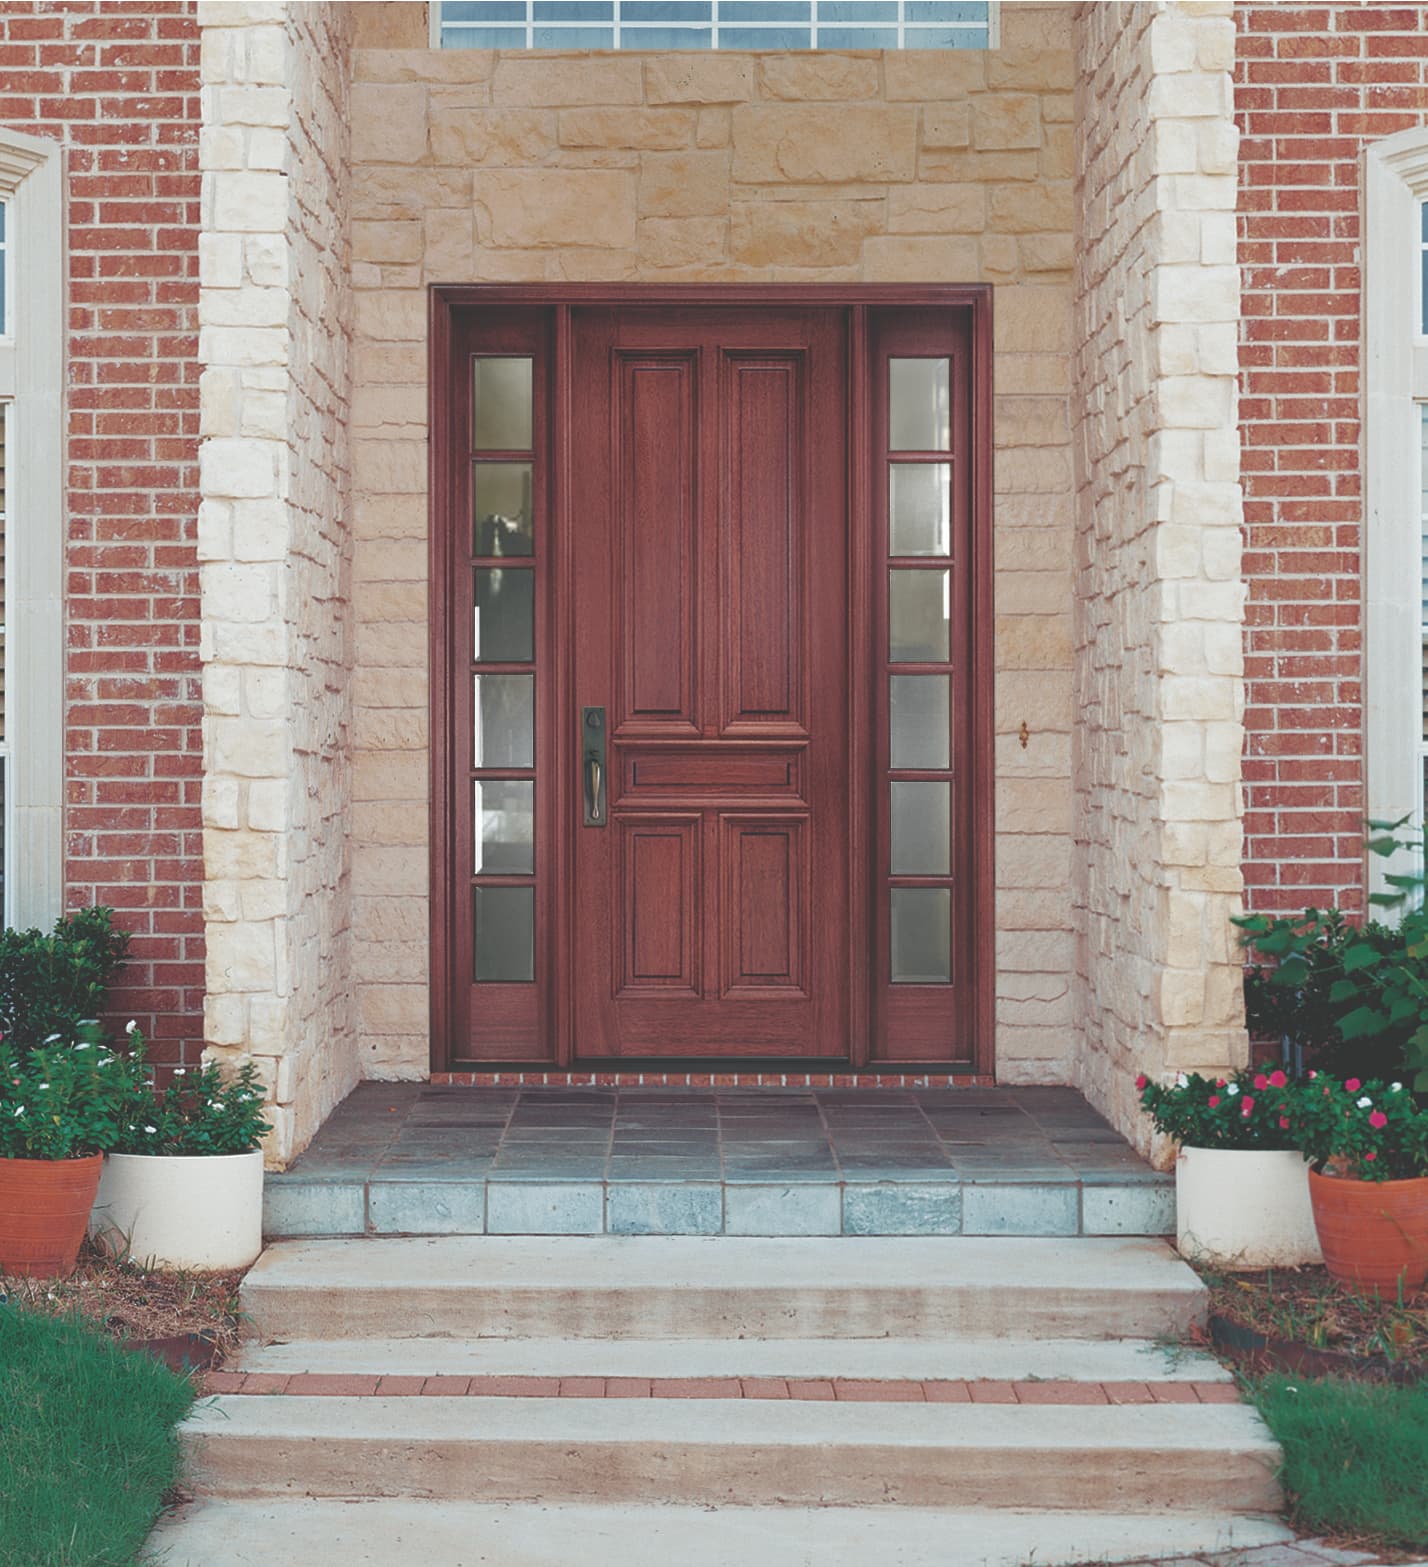 Solid wood door with glass sidelights surrounded by stone entryway